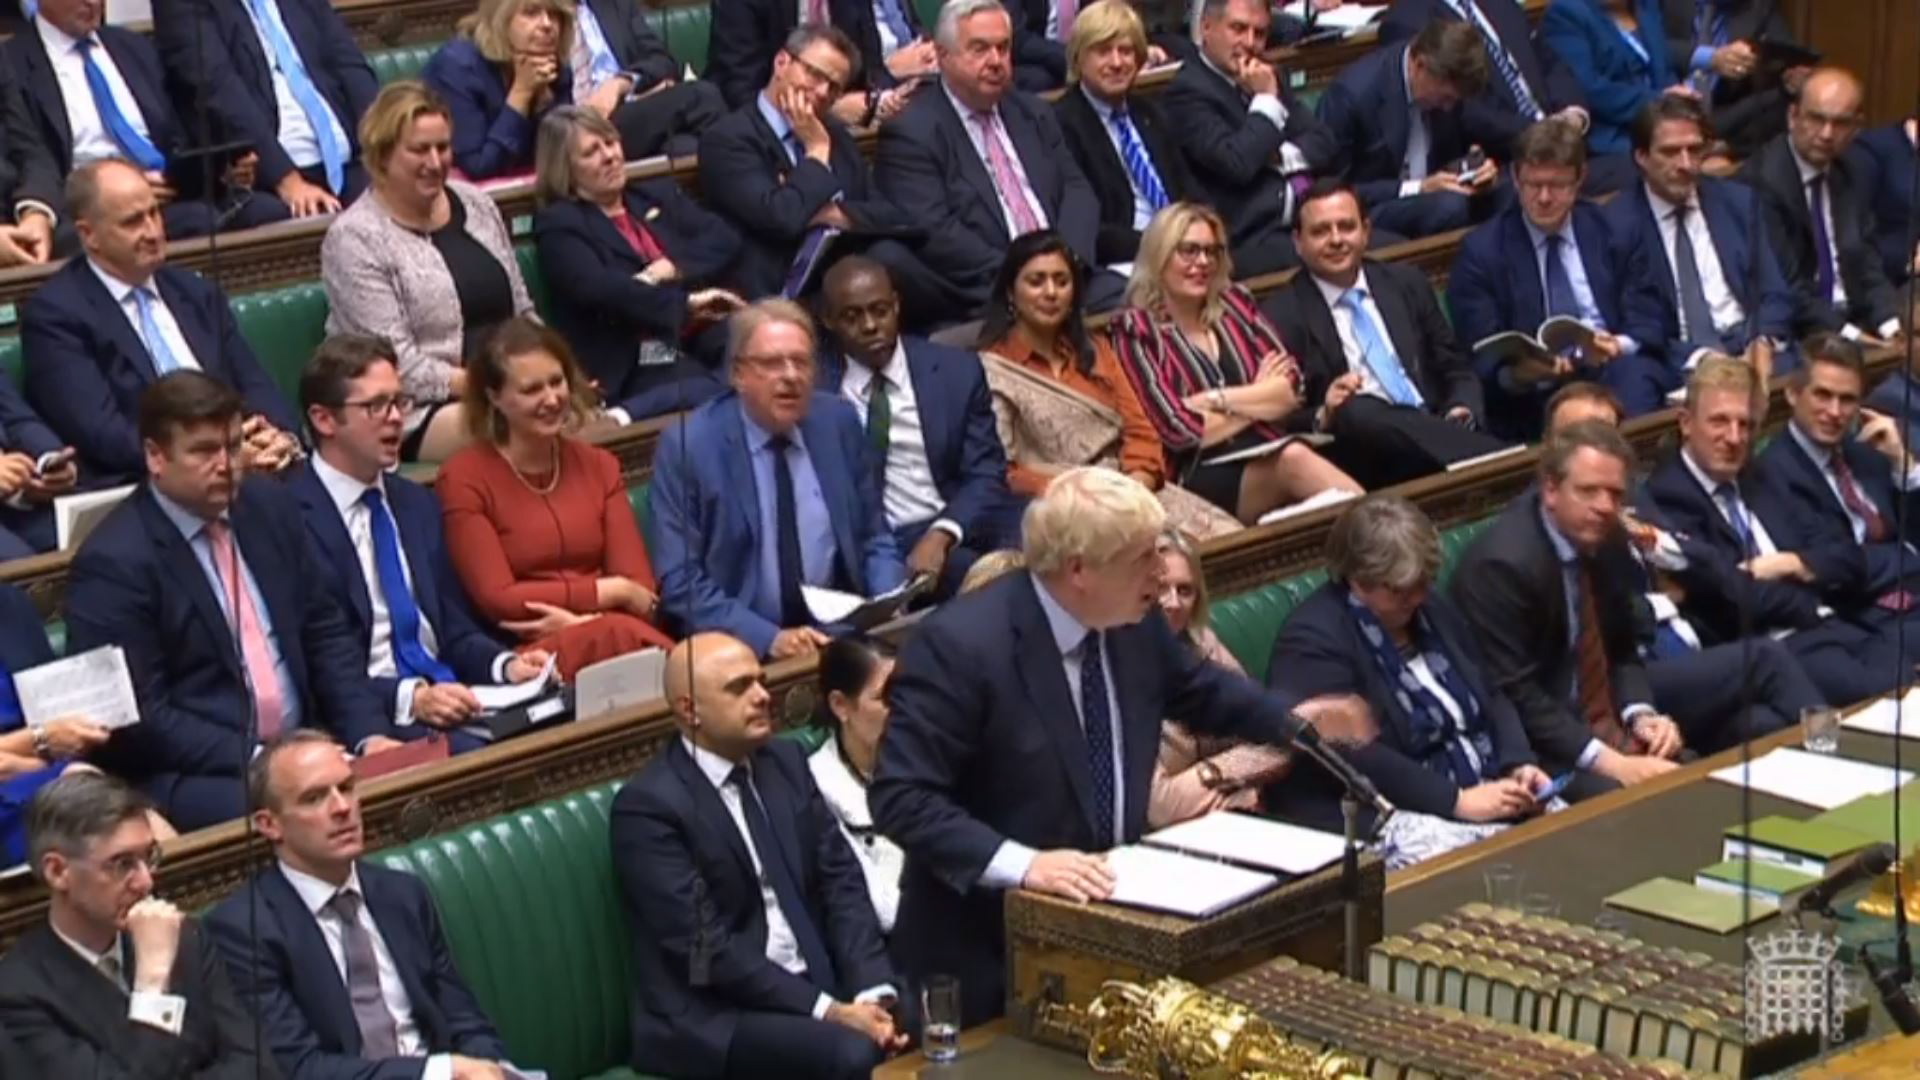 epa07920236 A grab from a handout video made available by the UK Parliamentary Recording Unit shows British Prime Minister Boris Johnson during a debate at the House of Commons in London, Britain, 14 October 2019. British parliament hold debates in the Queen's Speech done earlier in the day outlining the government's agenda.  EPA/UK PARLIAMENTARY RECORDING UNIT HANDOUT MANDATORY CREDIT: UK PARLIAMENTARY RECORDING UNIT HANDOUT EDITORIAL USE ONLY/NO SALES